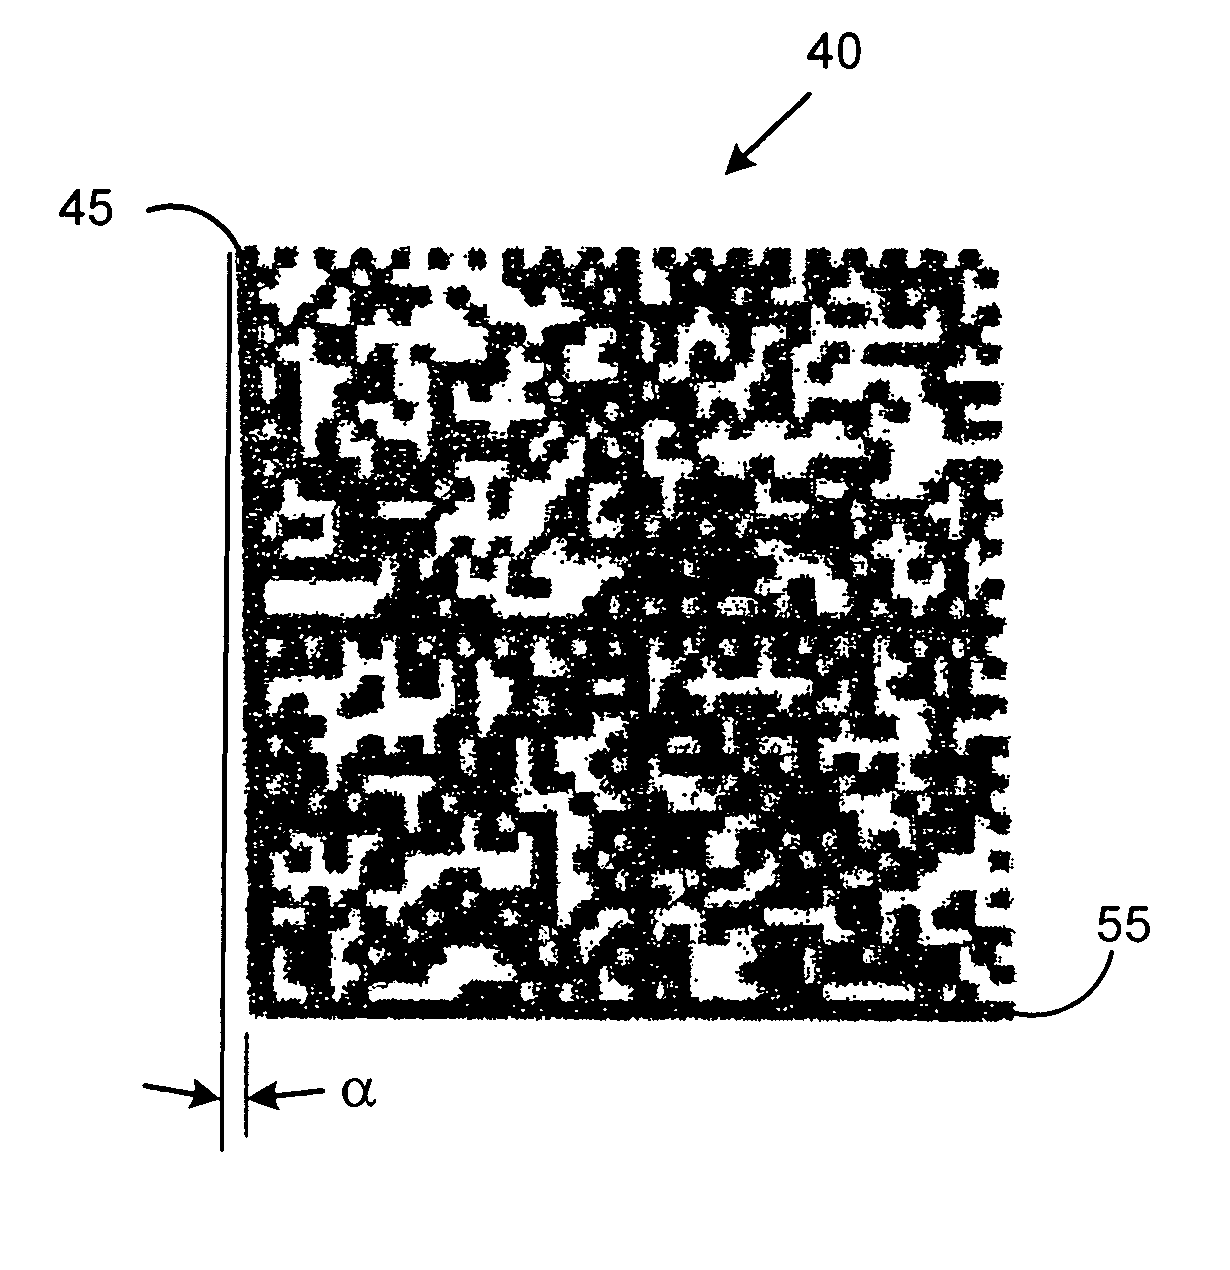 Method for detecting forged barcodes